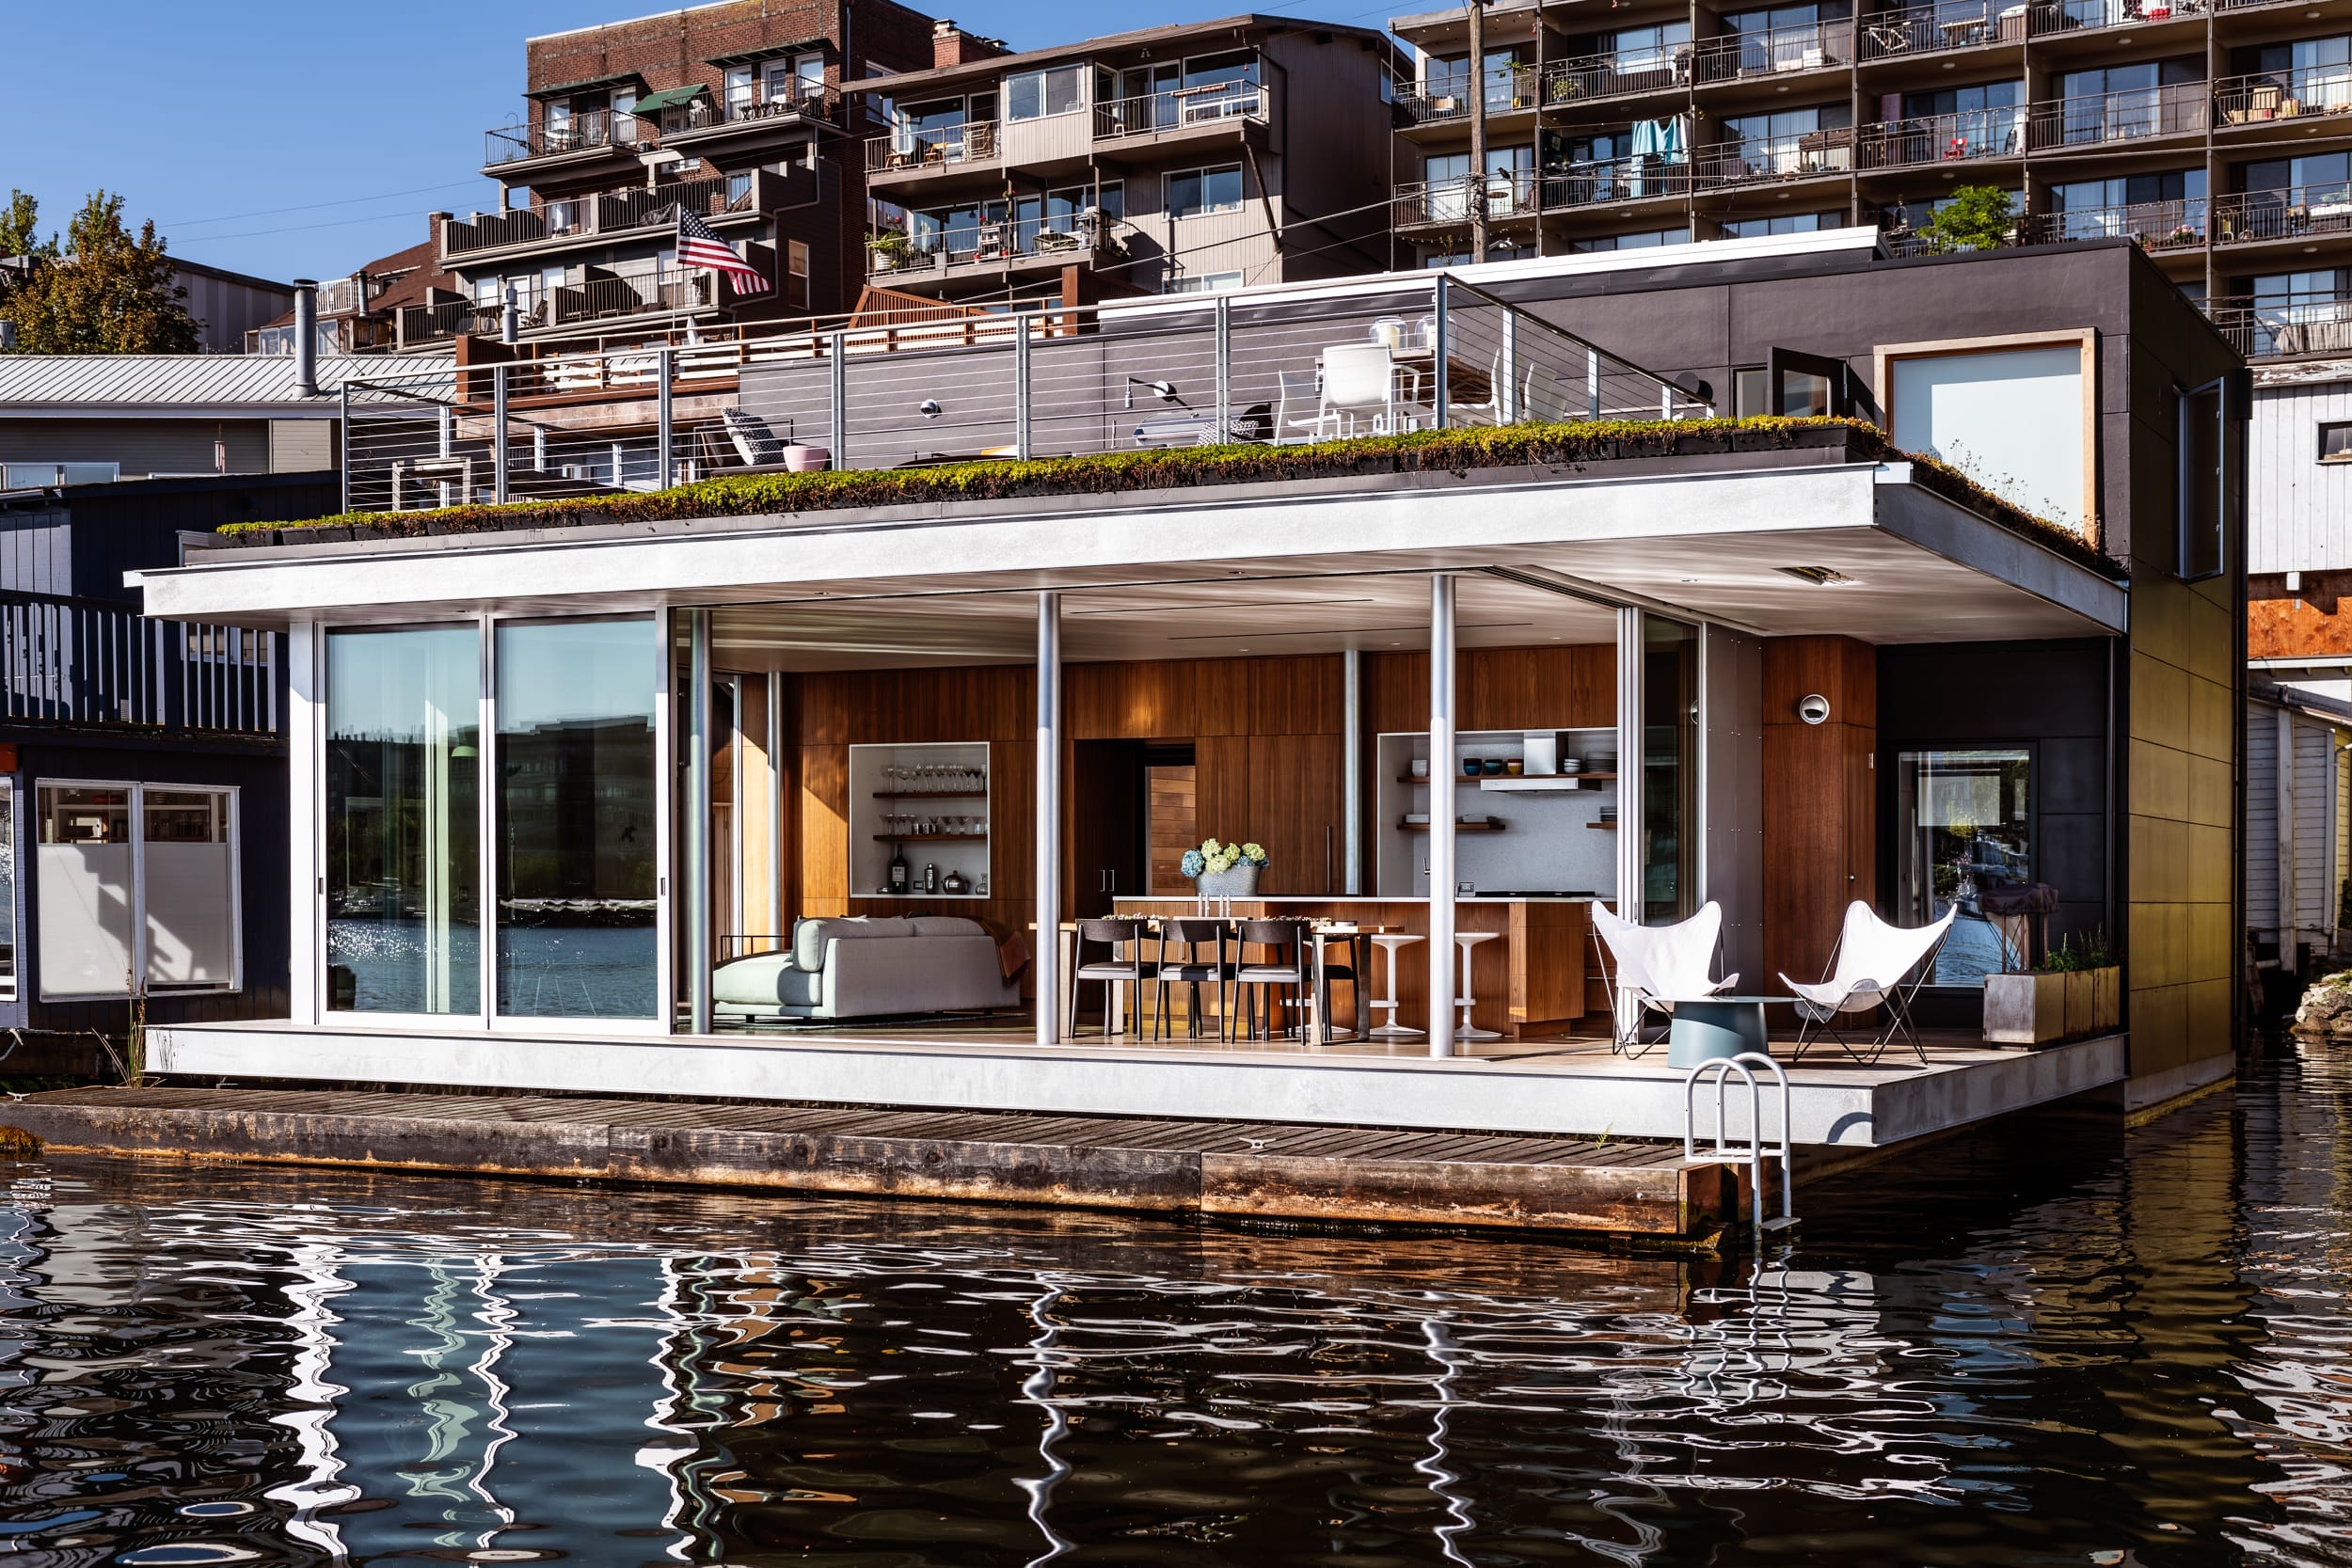 A houseboat on the water in a city.